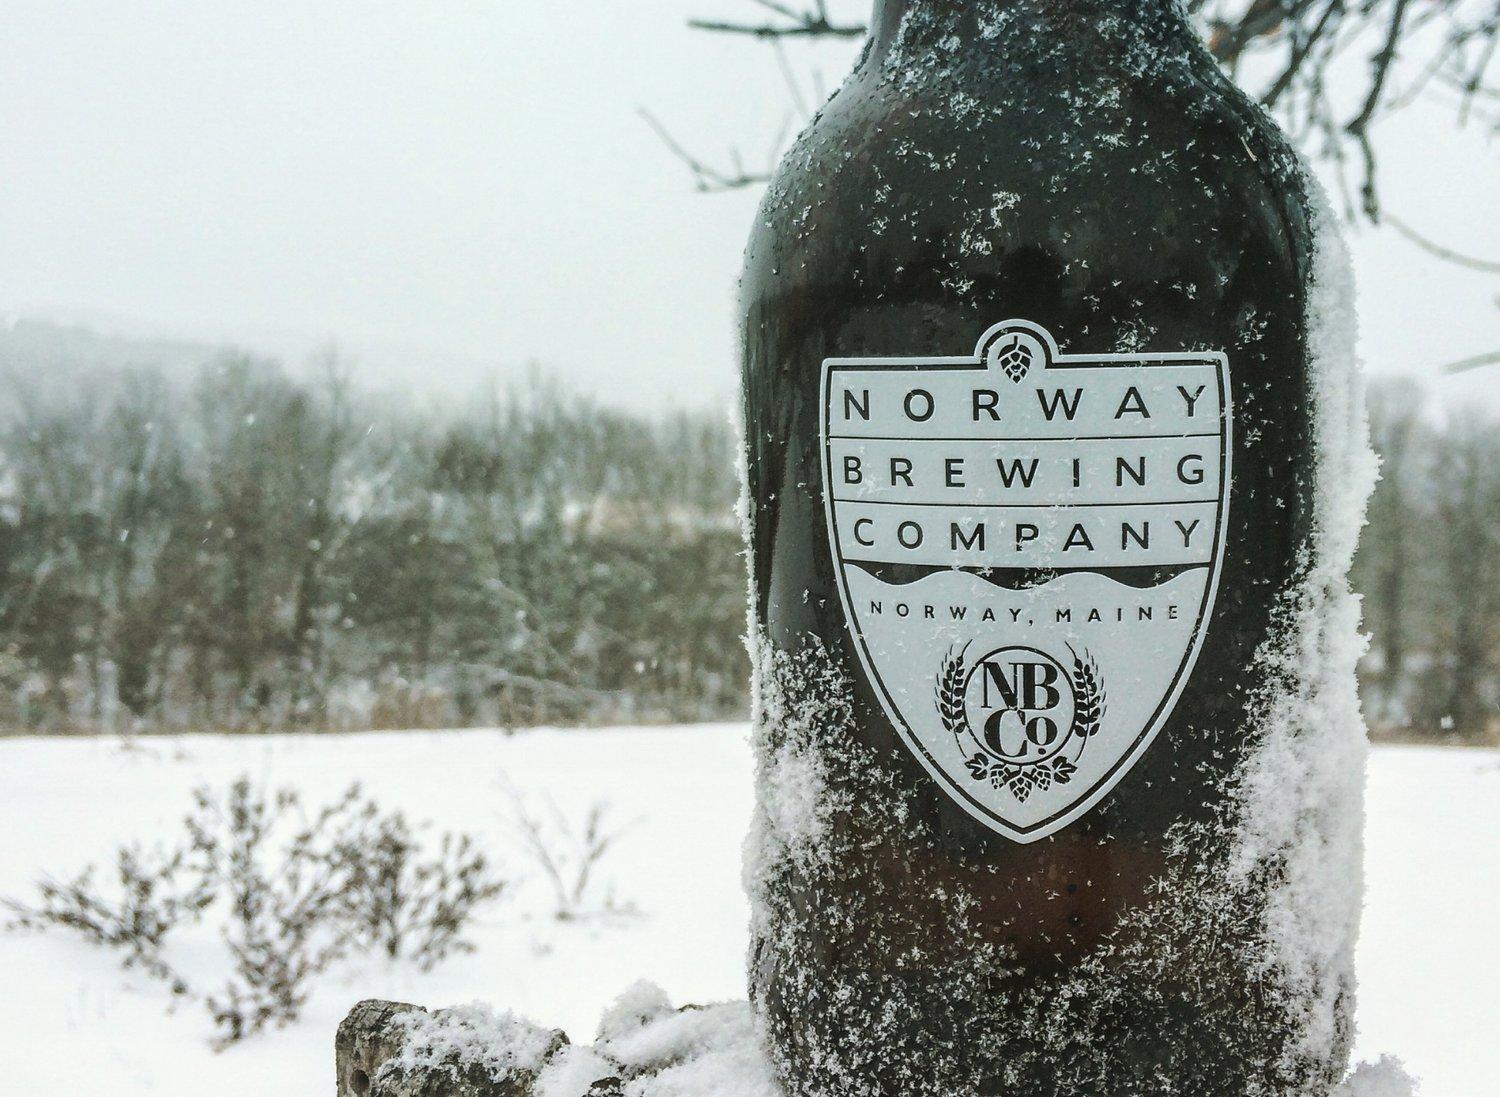 Pet Friendly Norway Brewing Company